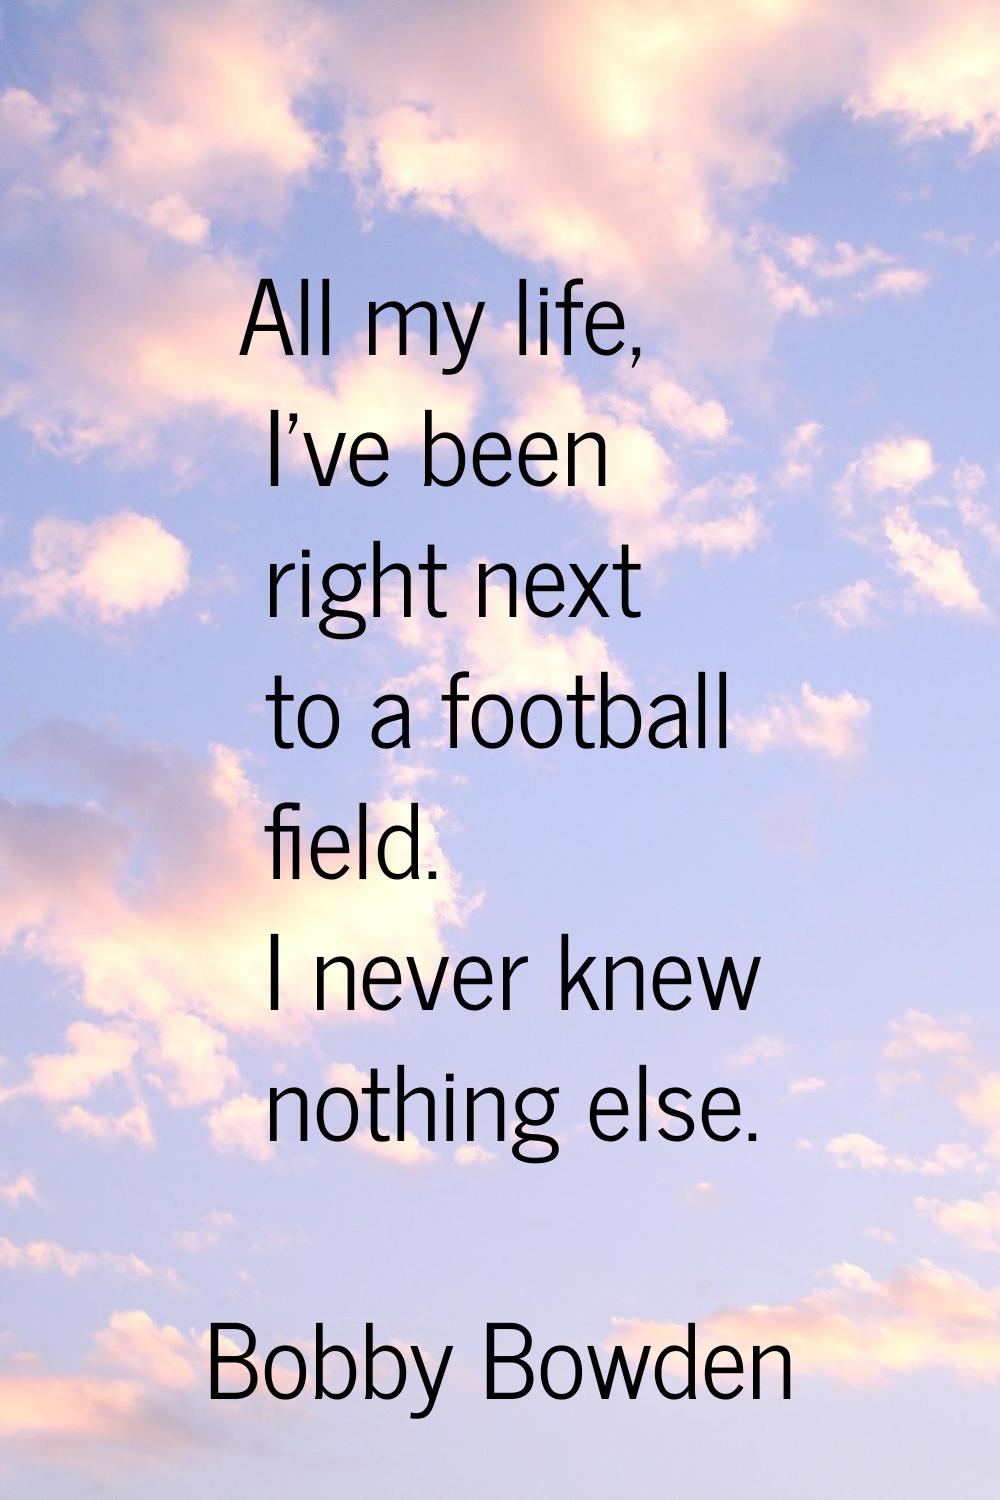 All my life, I've been right next to a football field. I never knew nothing else.